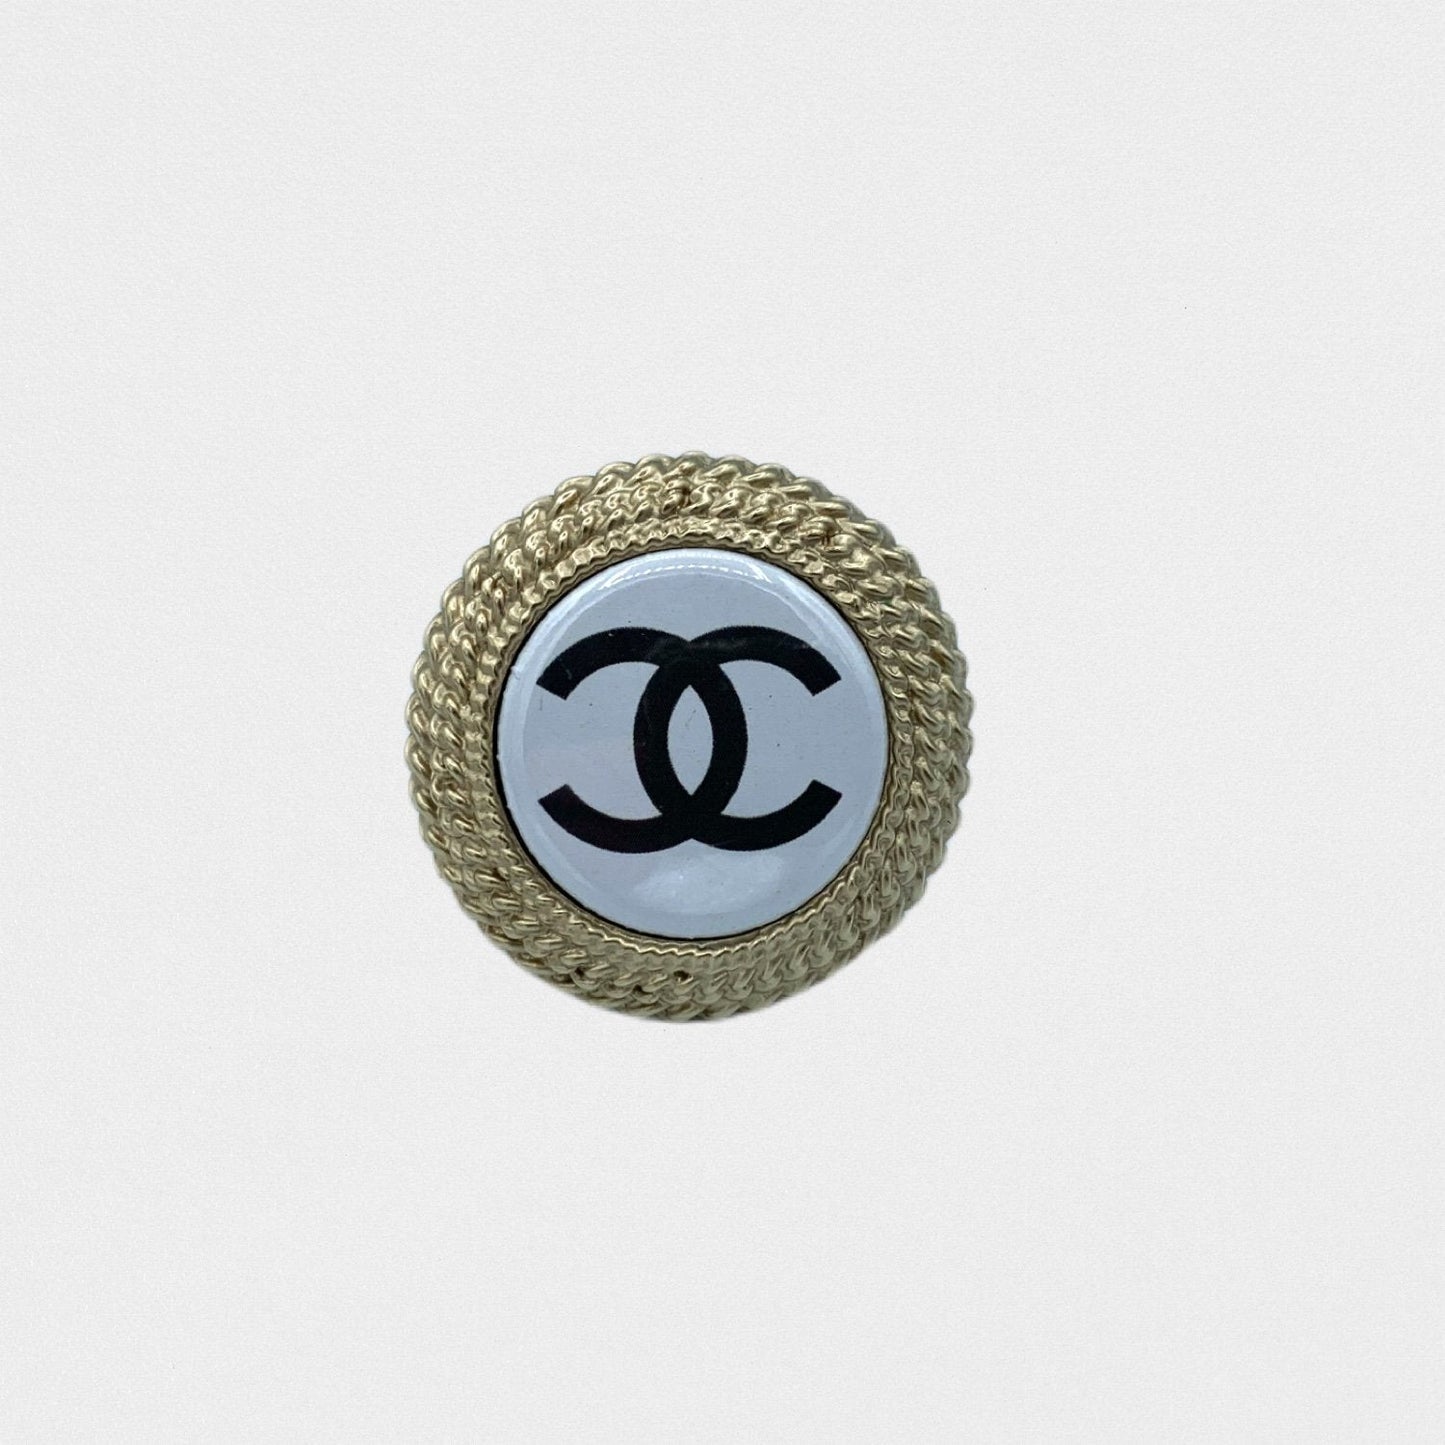 Lysis vintage Chanel CC ring - T51 - 2010s